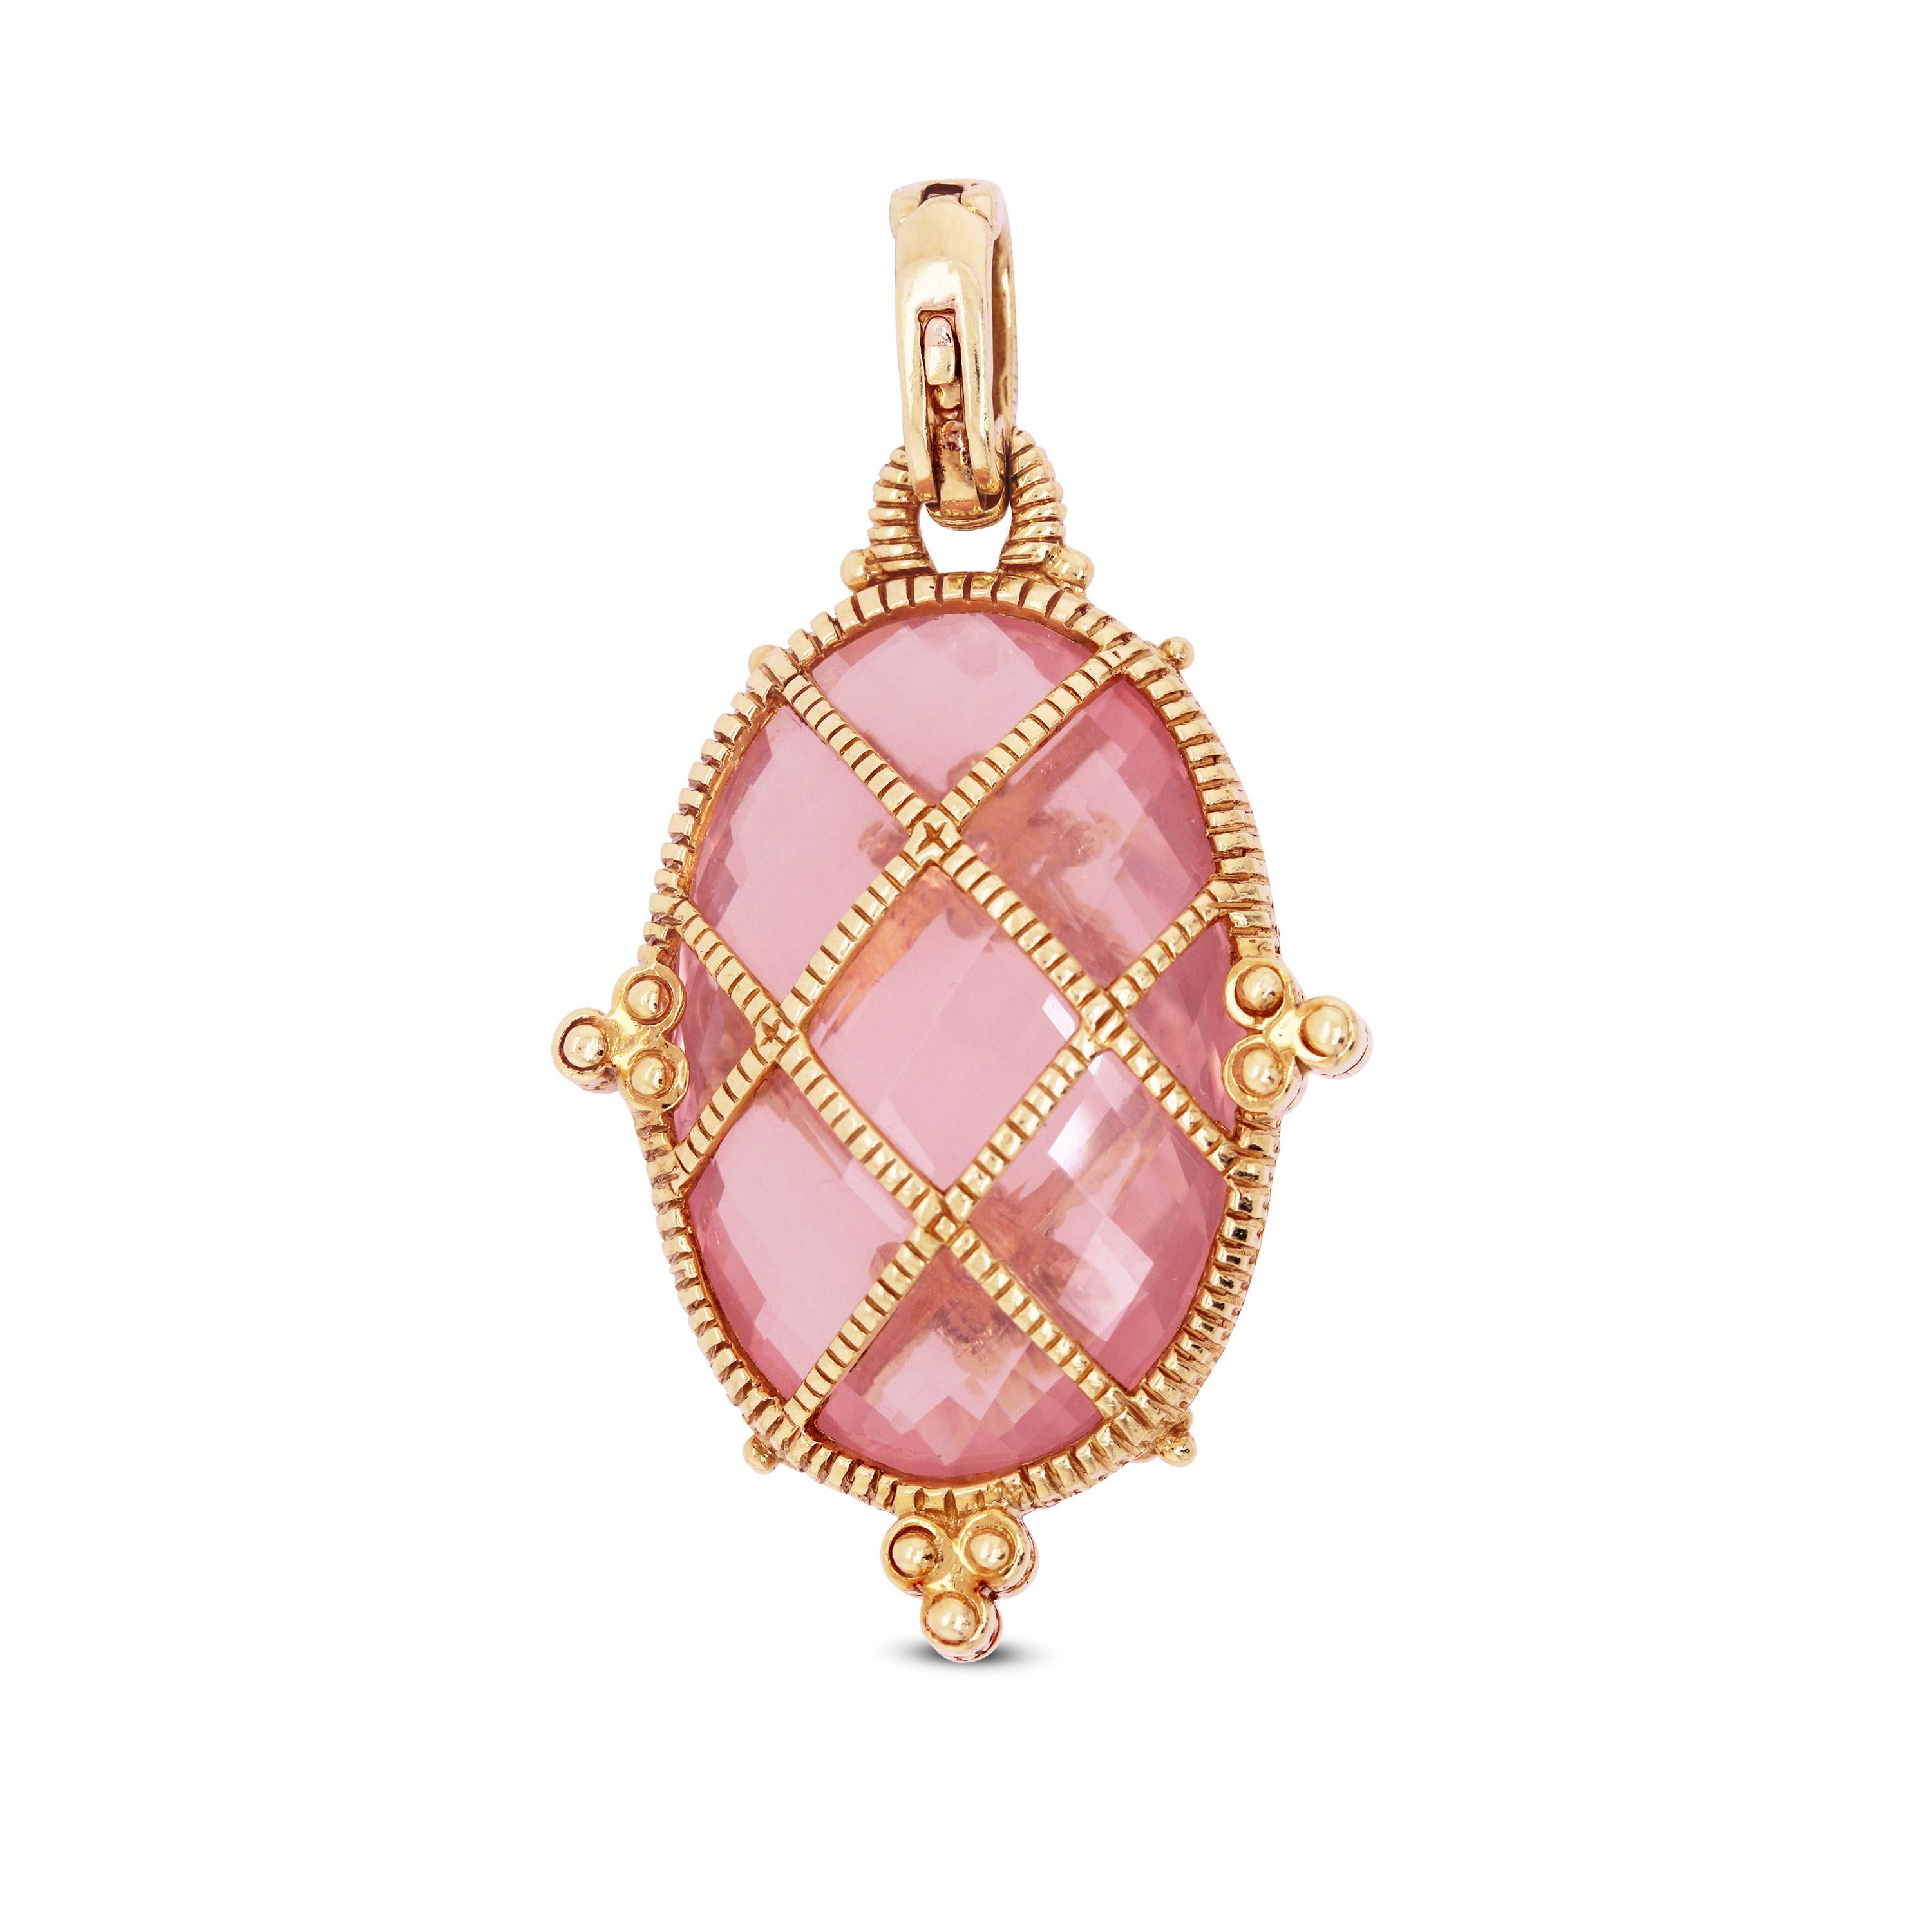 Judith Ripka 18K Yellow Gold Diamond Chain Necklace with Pink Crystal Pendant

This unique necklace from Judith Ripka features an oval shaped enhancer pendant with diamonds and a Pink Crystal center

Chain features a dangling diamond heart and